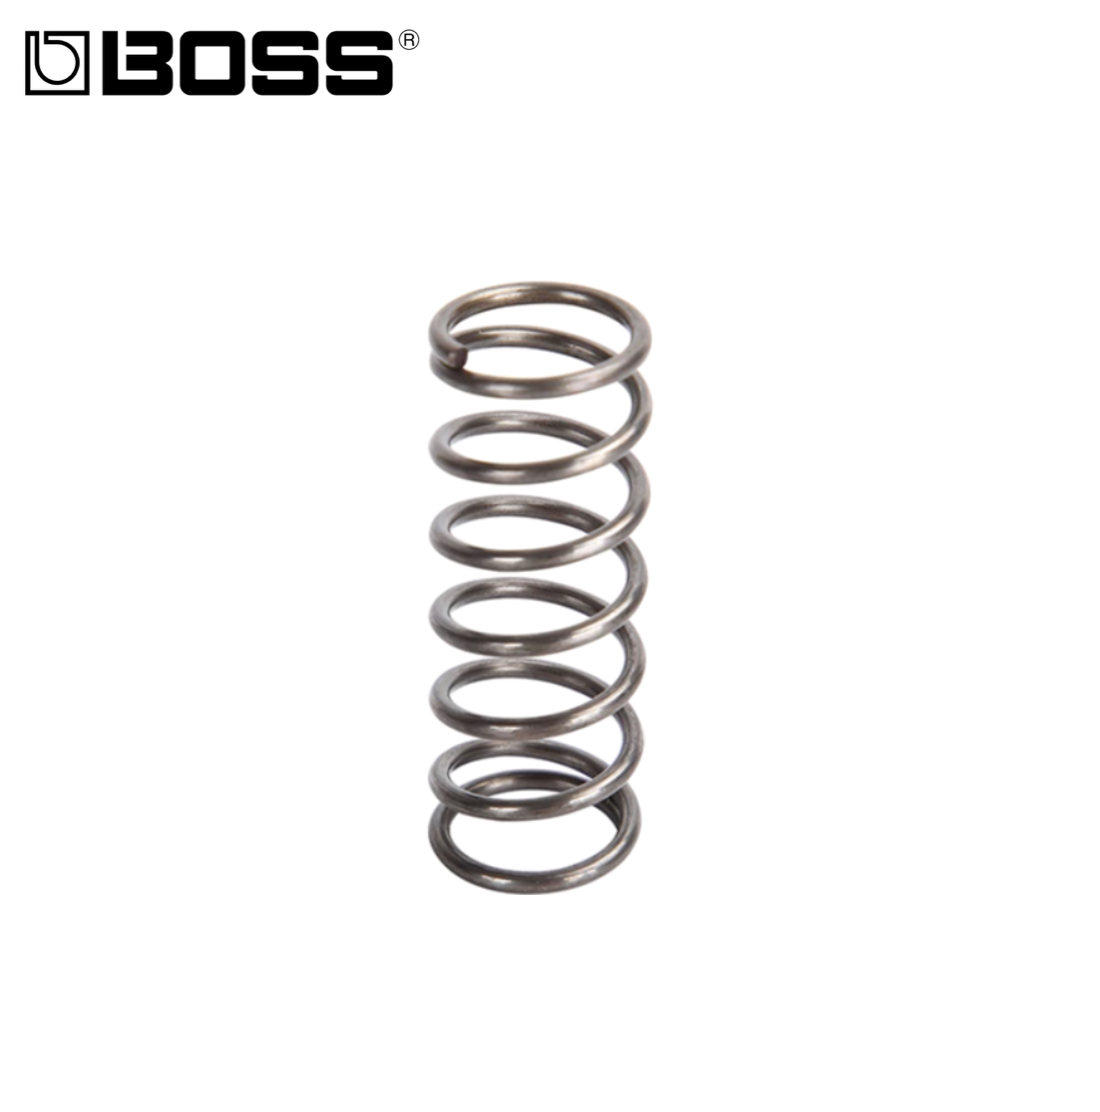 Boss Compact Pedal Coil Spring 2217710900